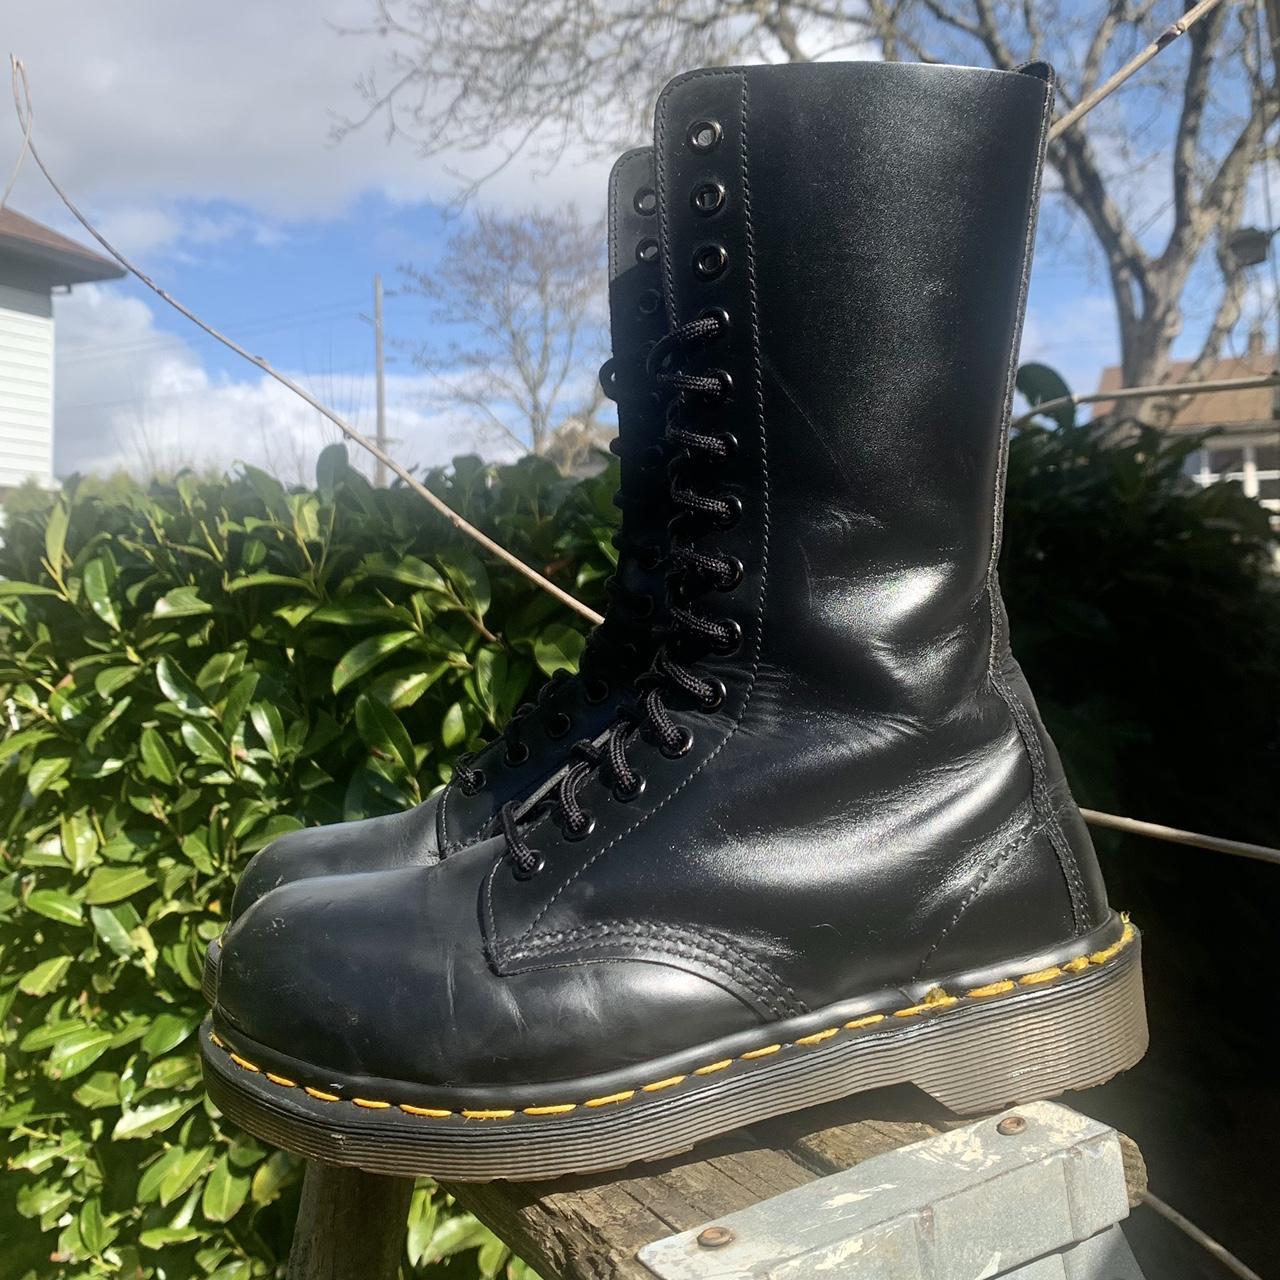 An Ode to Dr. Martens, the Combat Boots That Stole My Heart at 13